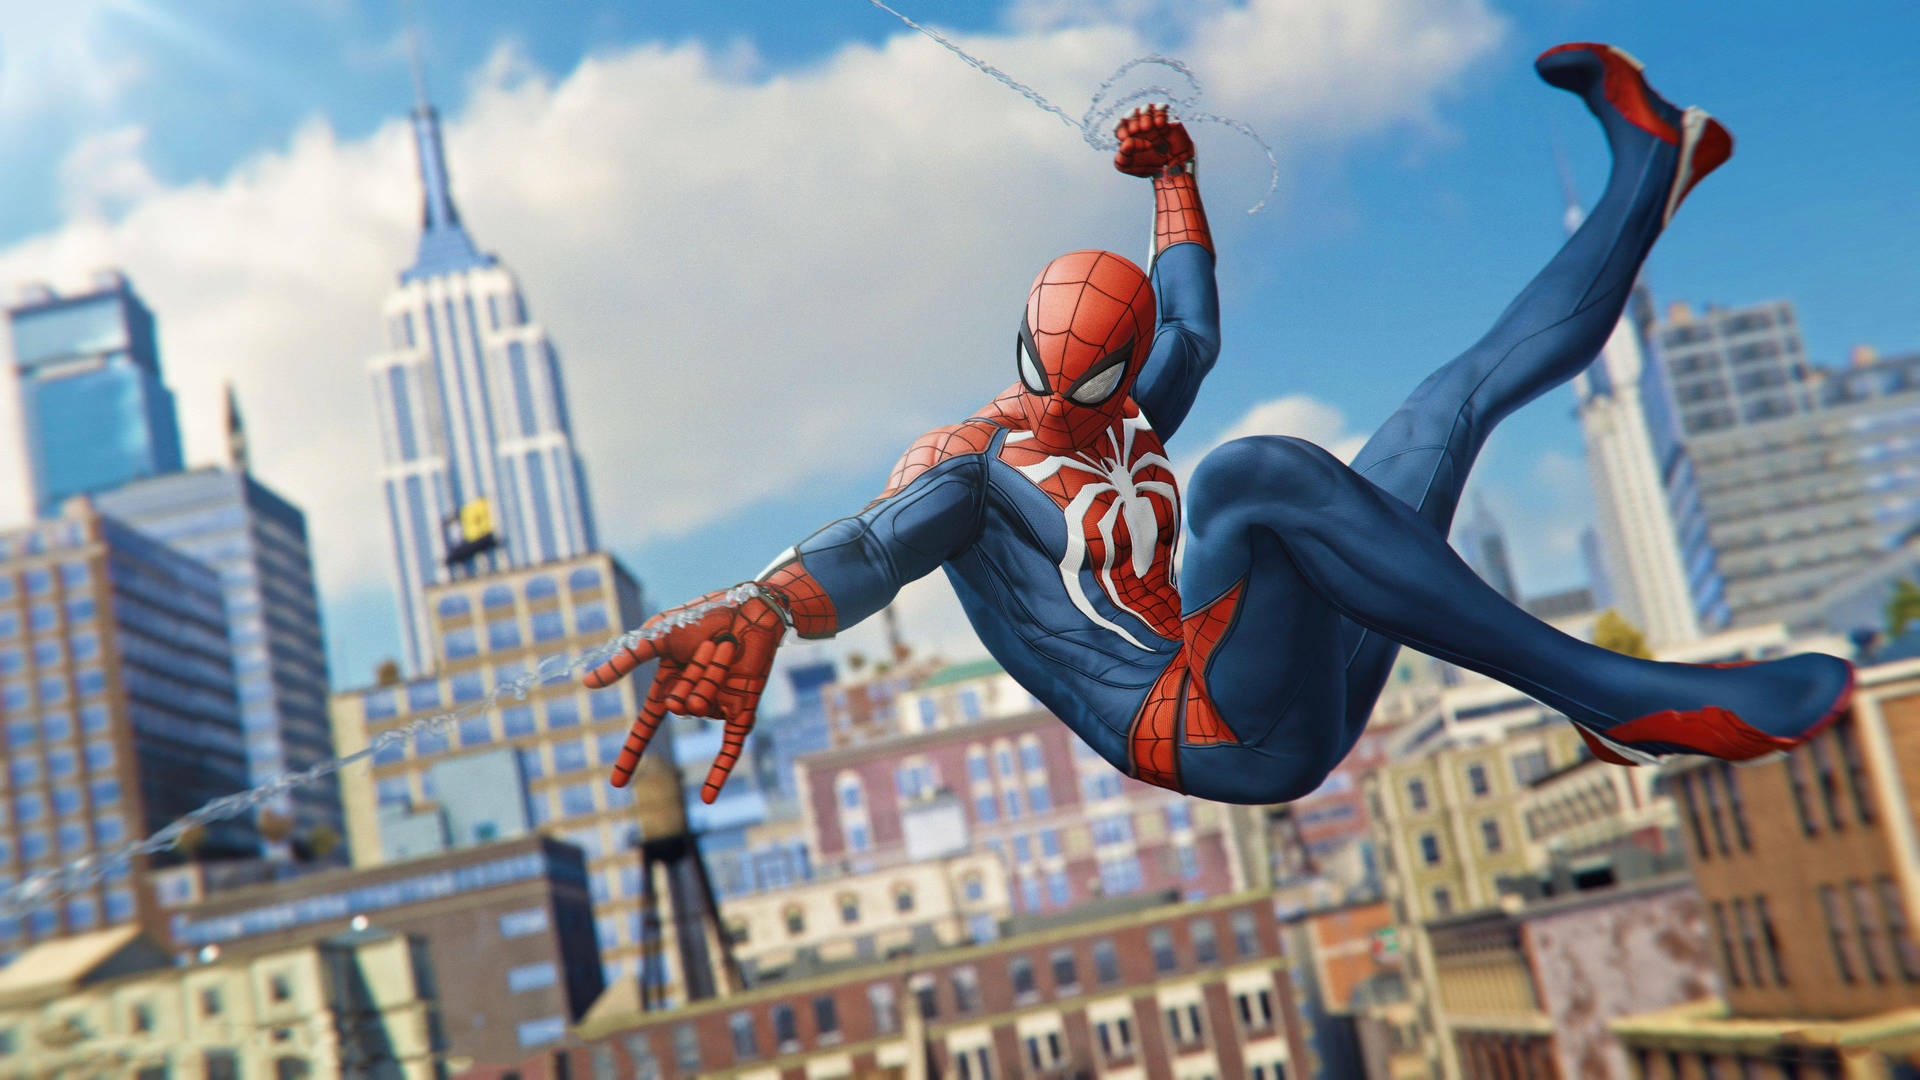 Experience the superhero adventure of Spider-Man: Miles Morales on the next-generation PlayStation 5. Wallpaper